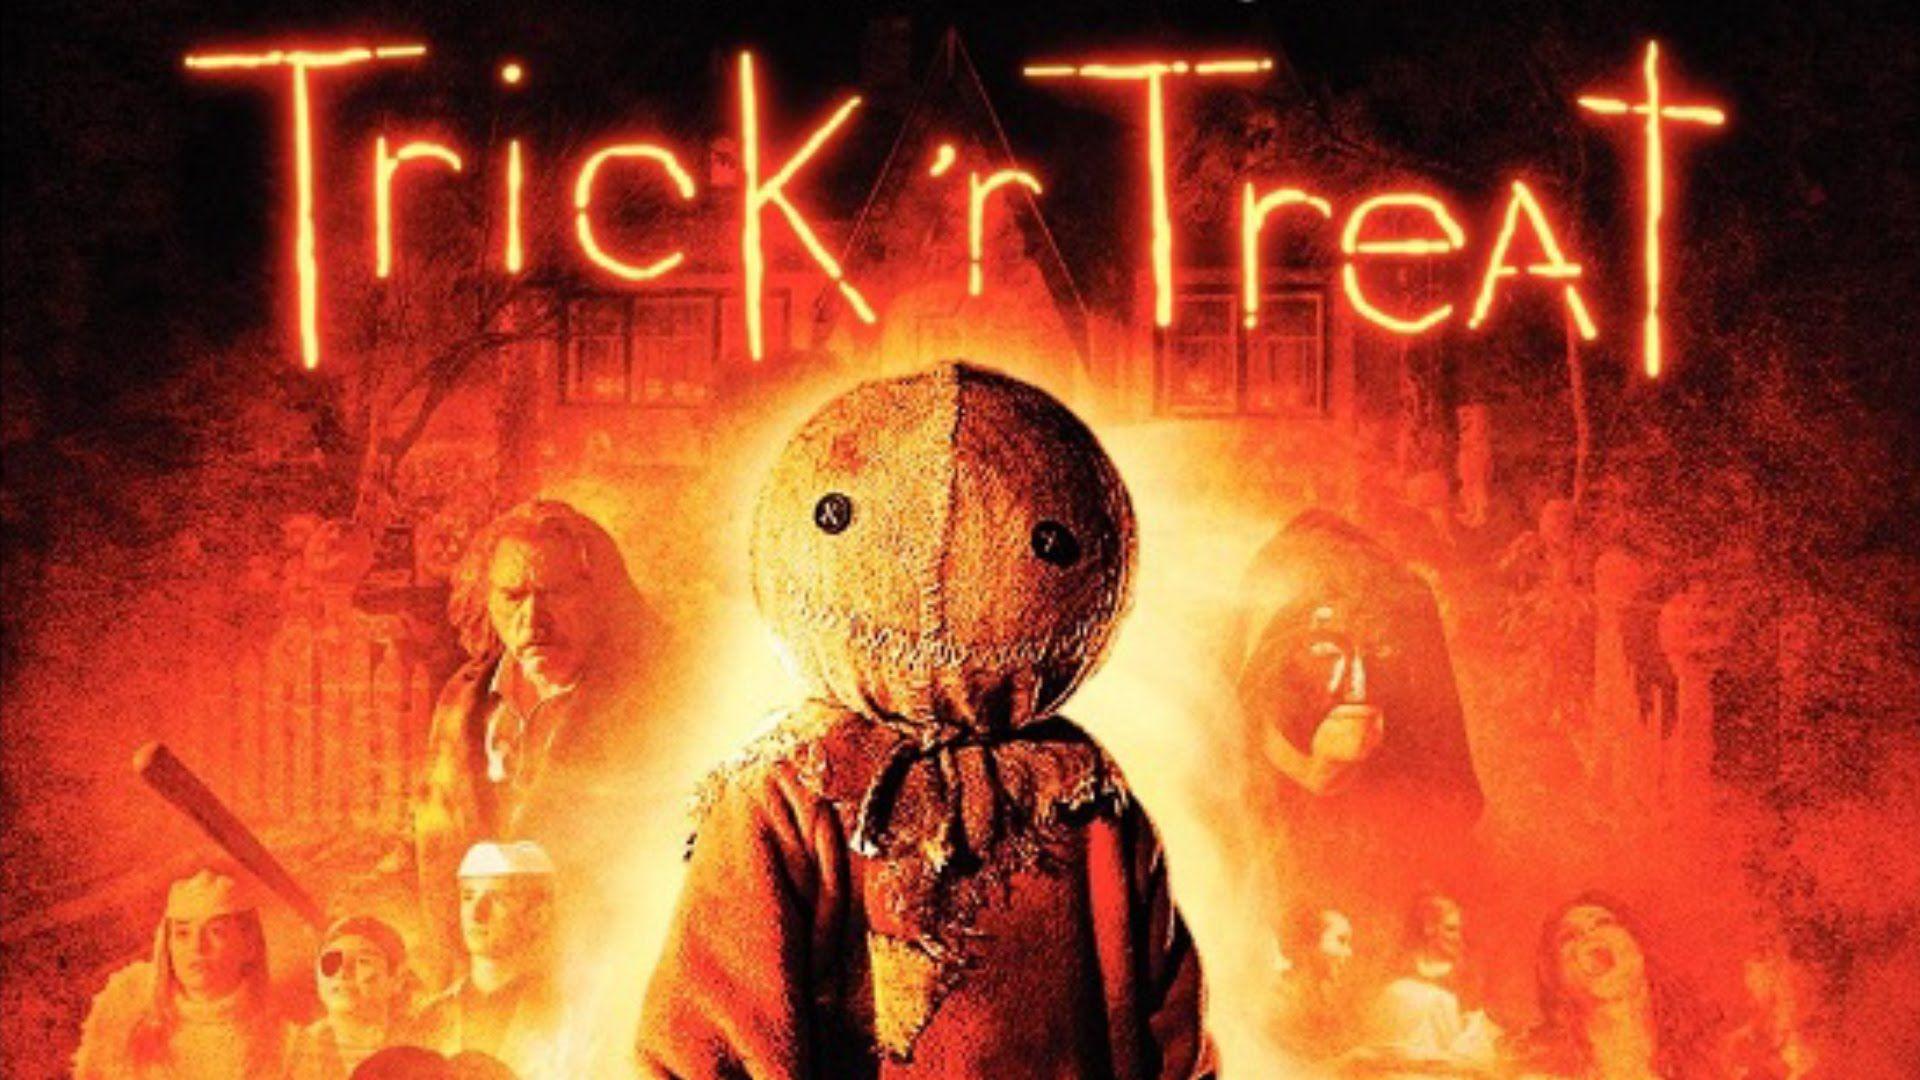 Trick 'r Treat Wallpapers.